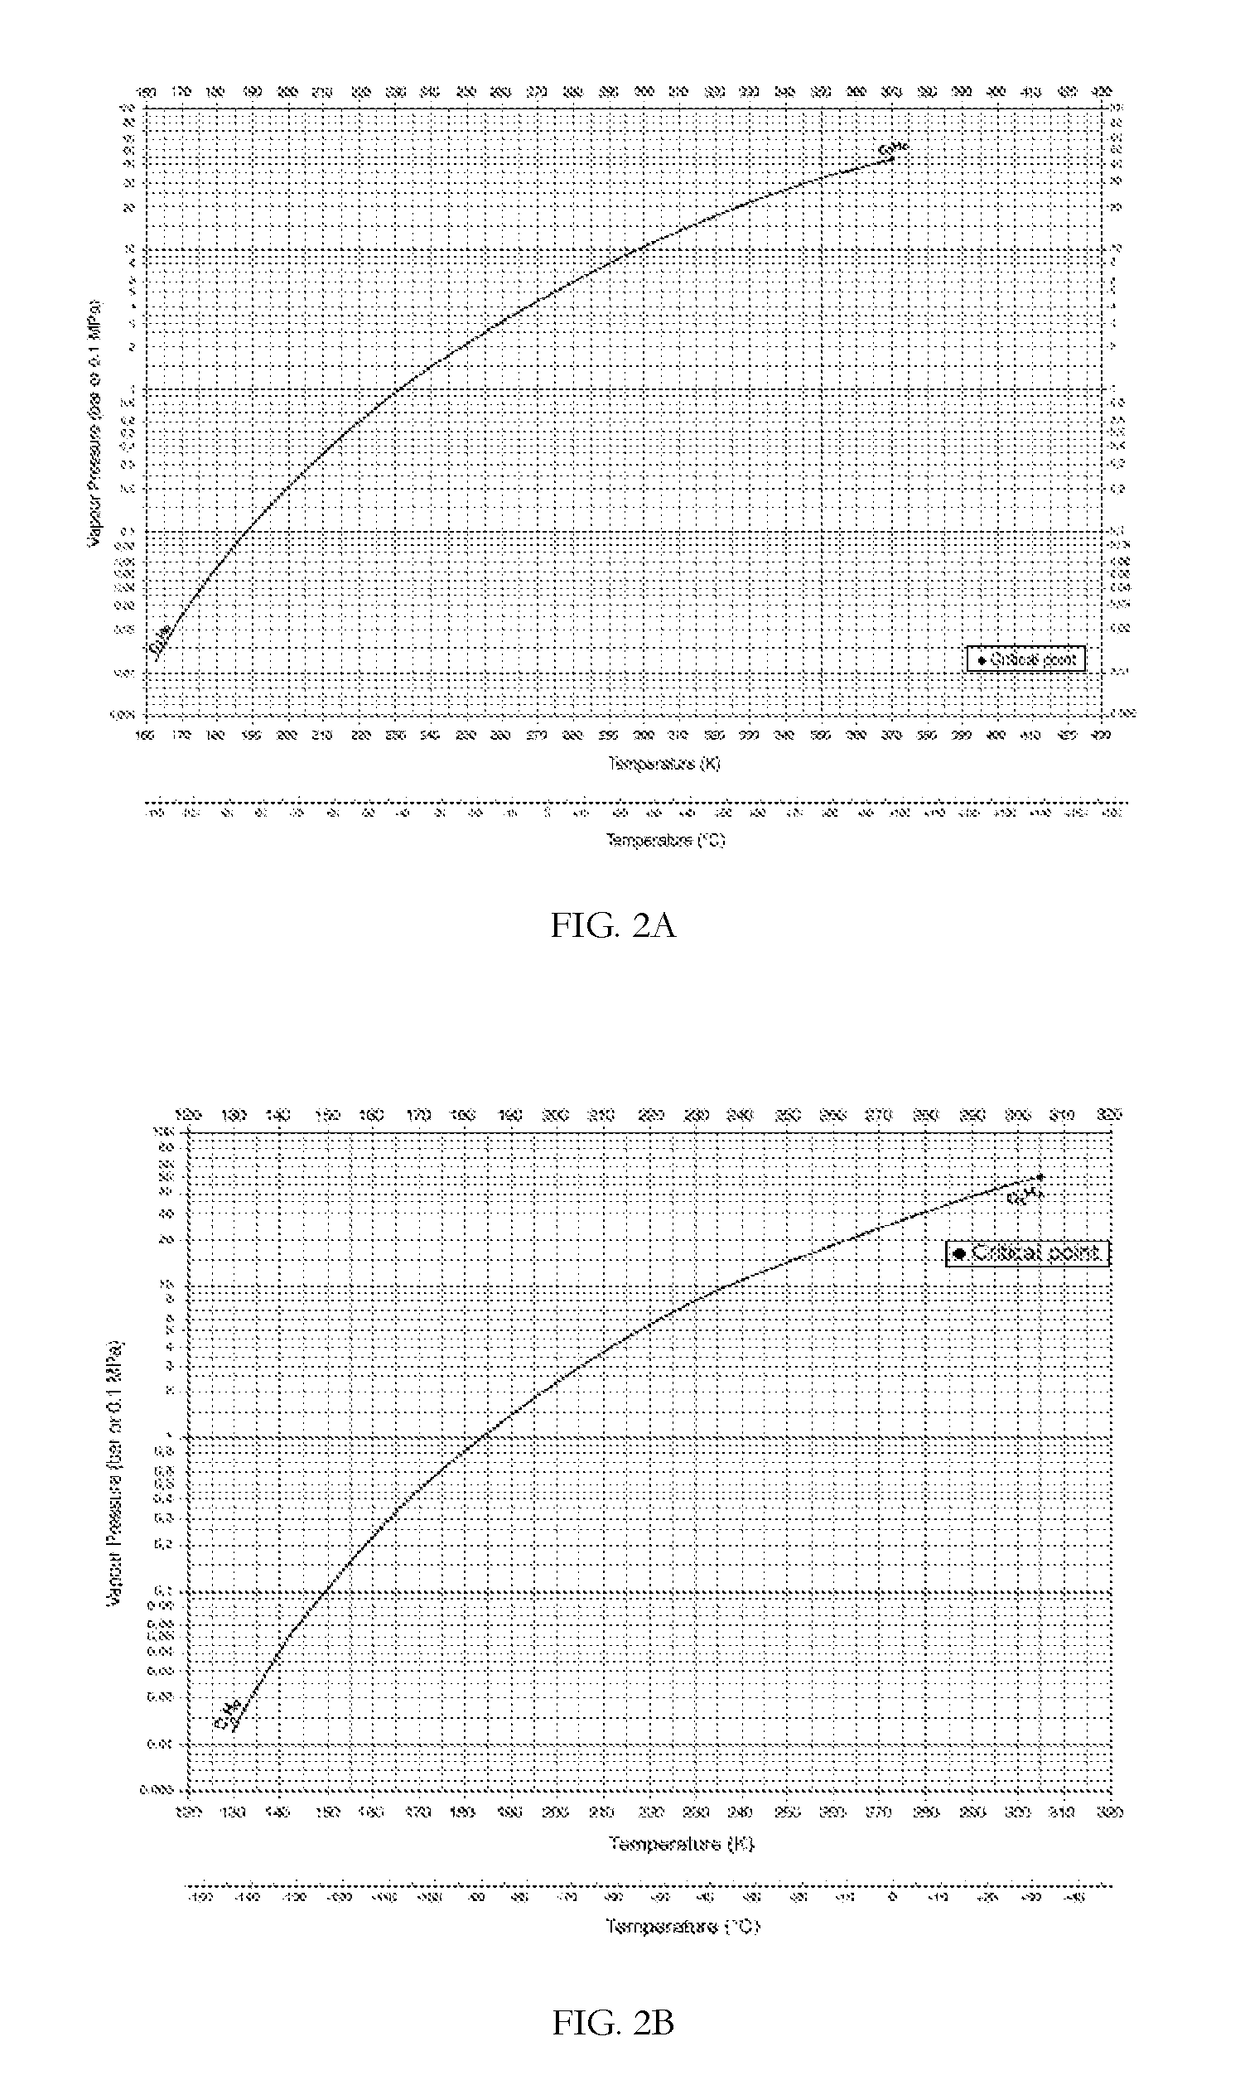 Supersonic treatment of vapor streams for separation and drying of hydrocarbon gases